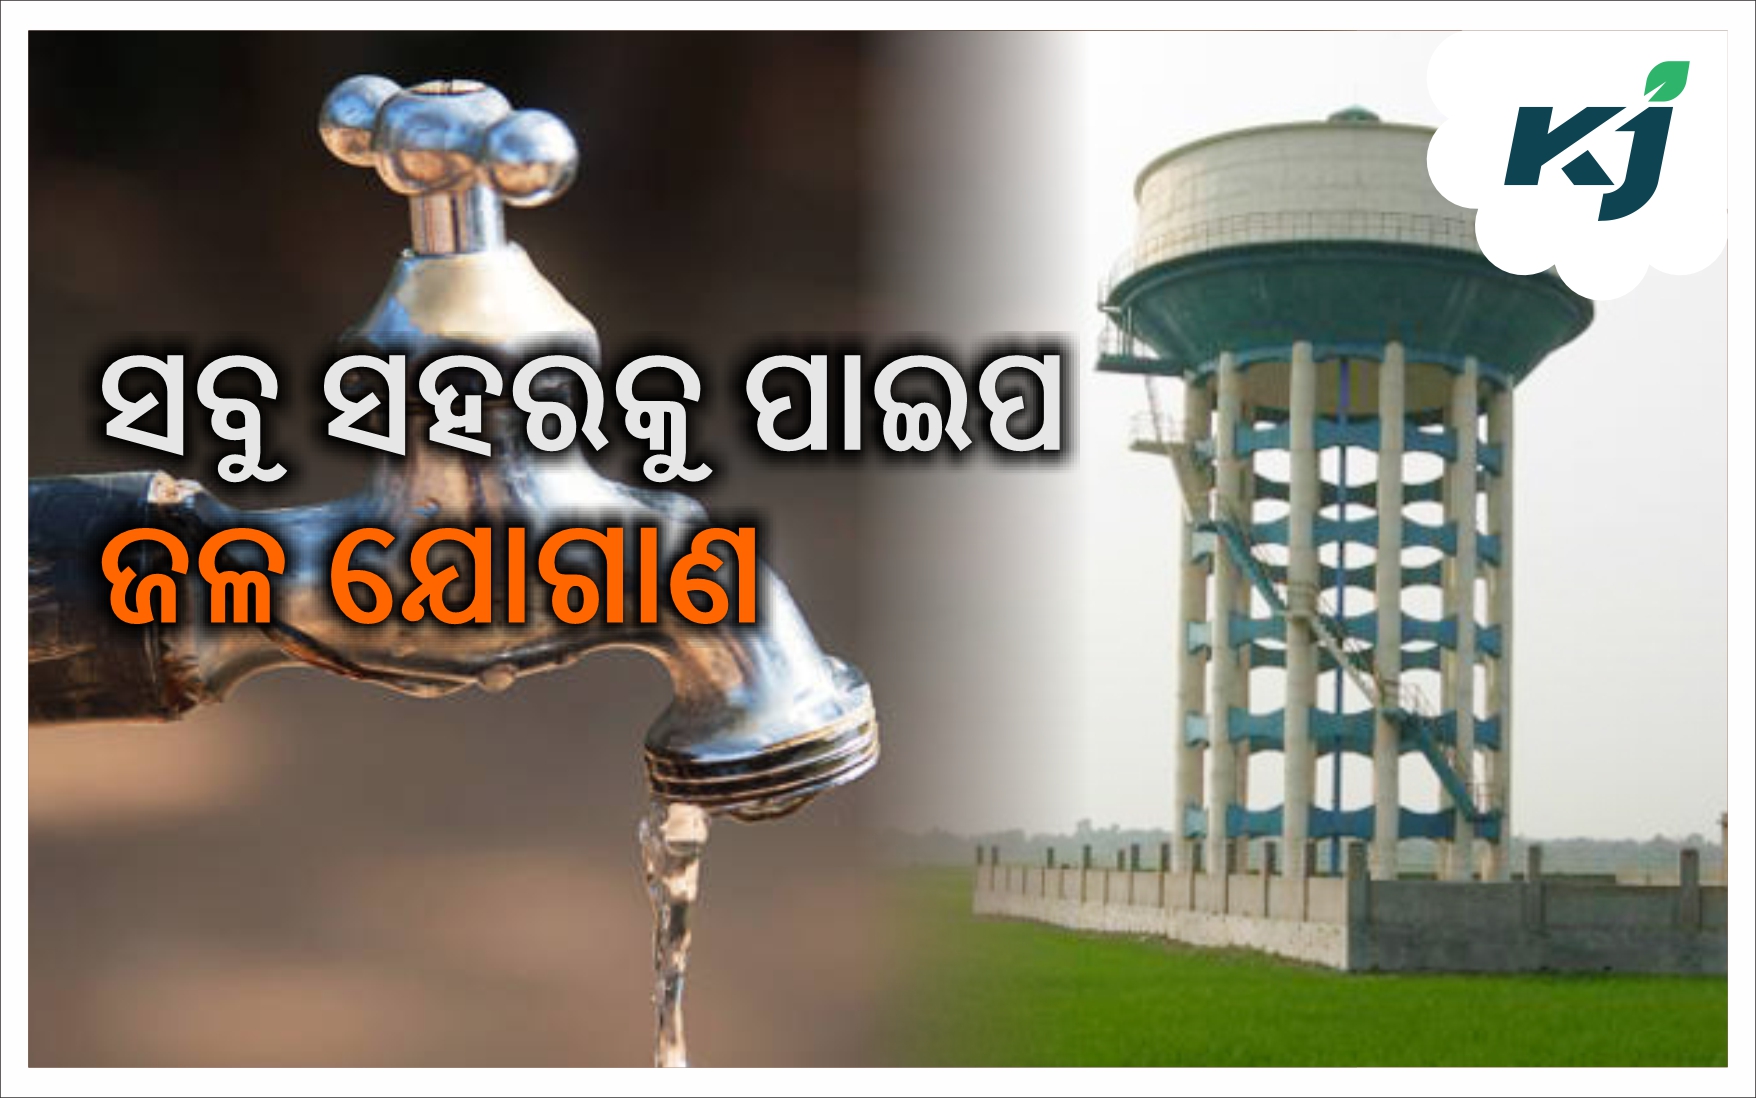 Piped water to all cities of the state